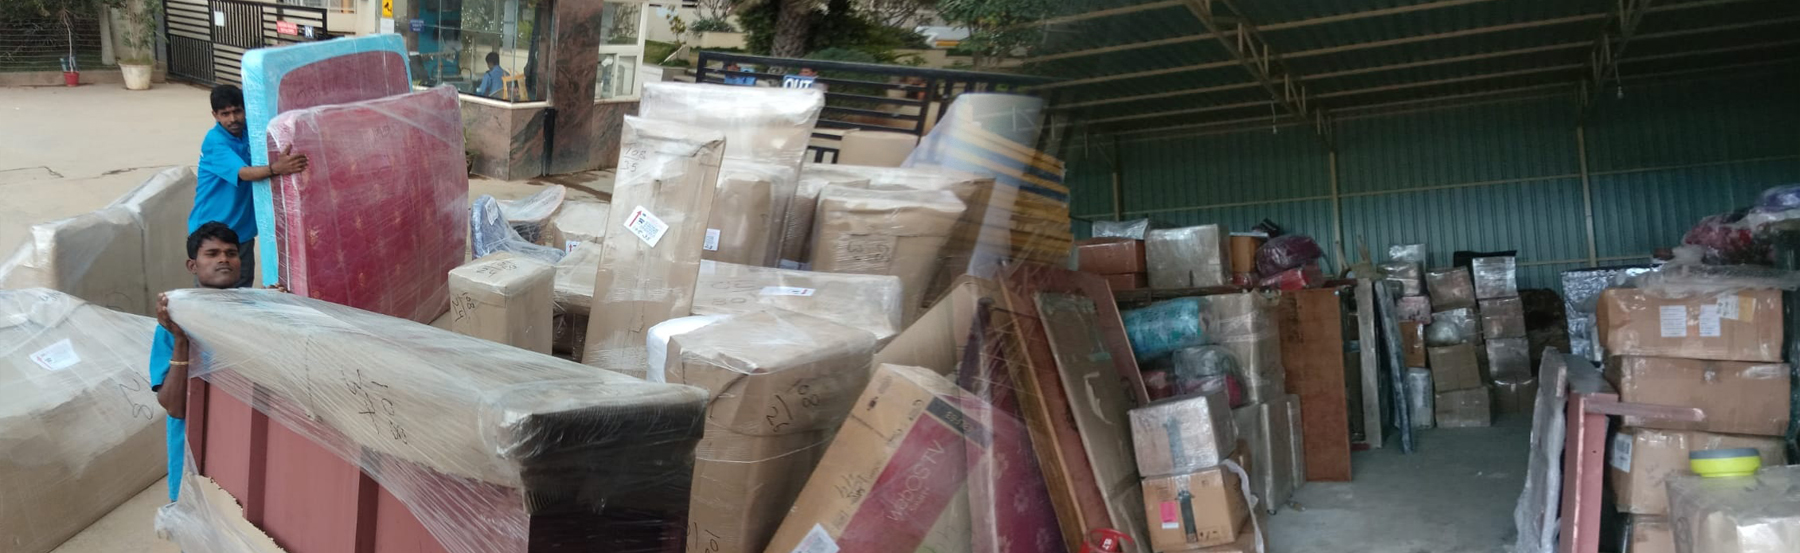 Swathi Relocation Packers and Movers